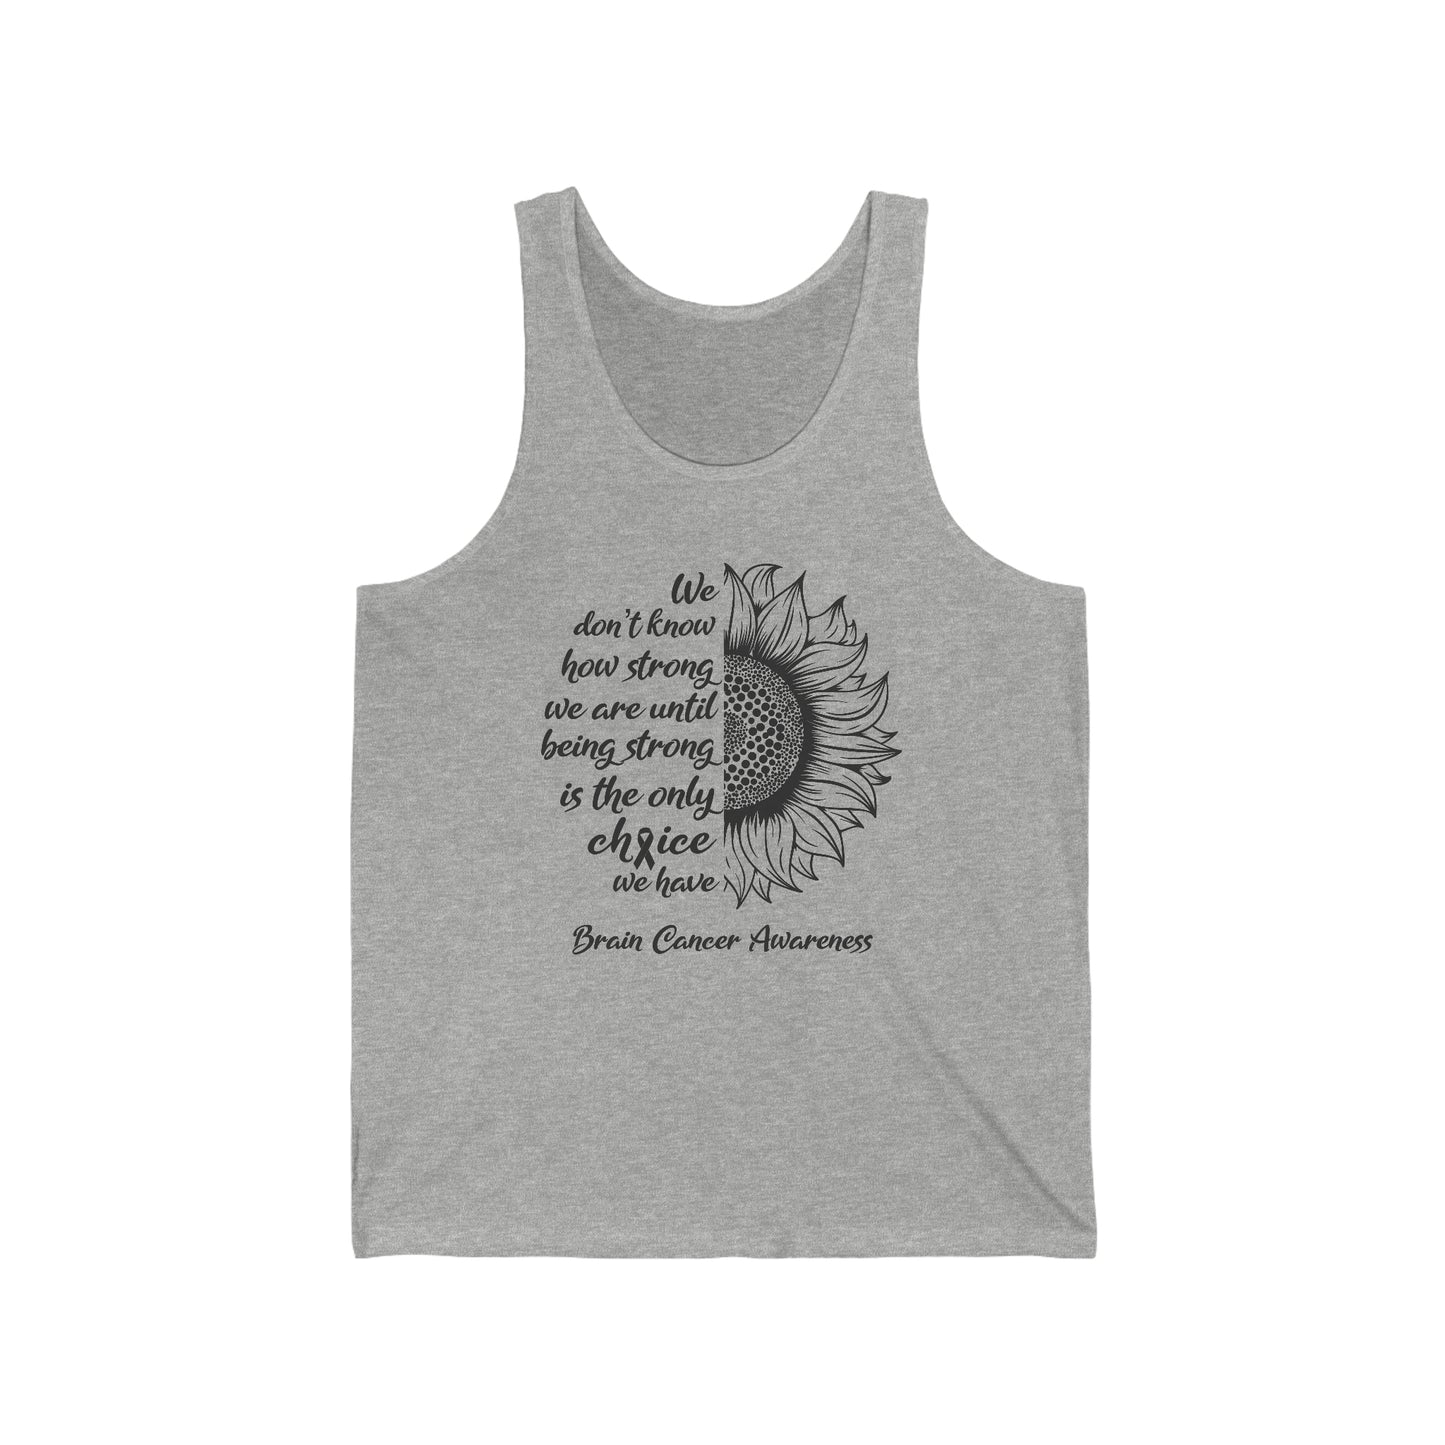 Cancer Tank Top For Brain Cancer Awareness With Inspirational Sunflower Message